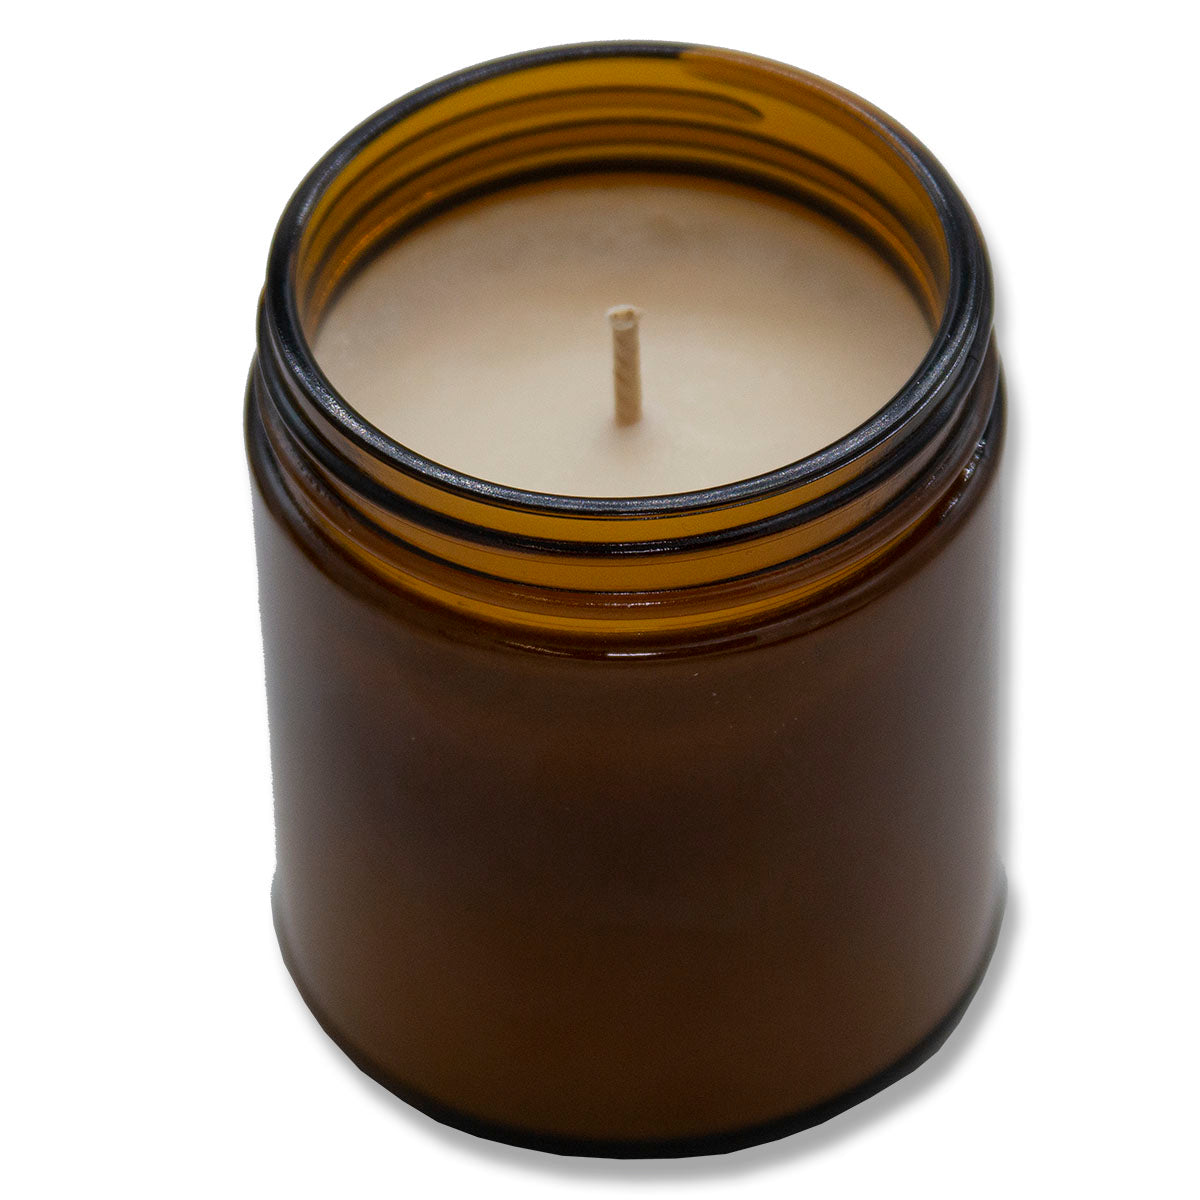 Cinnamon Vanilla, Lone Star Candles & More's Premium Hand Poured Strong Scented Soy Wax Gift Candle, Ground Cinnamon & Sweet Vanilla Bean, USA Made in Texas, Round Amber Glass Jars, 9oz Happy Birthday